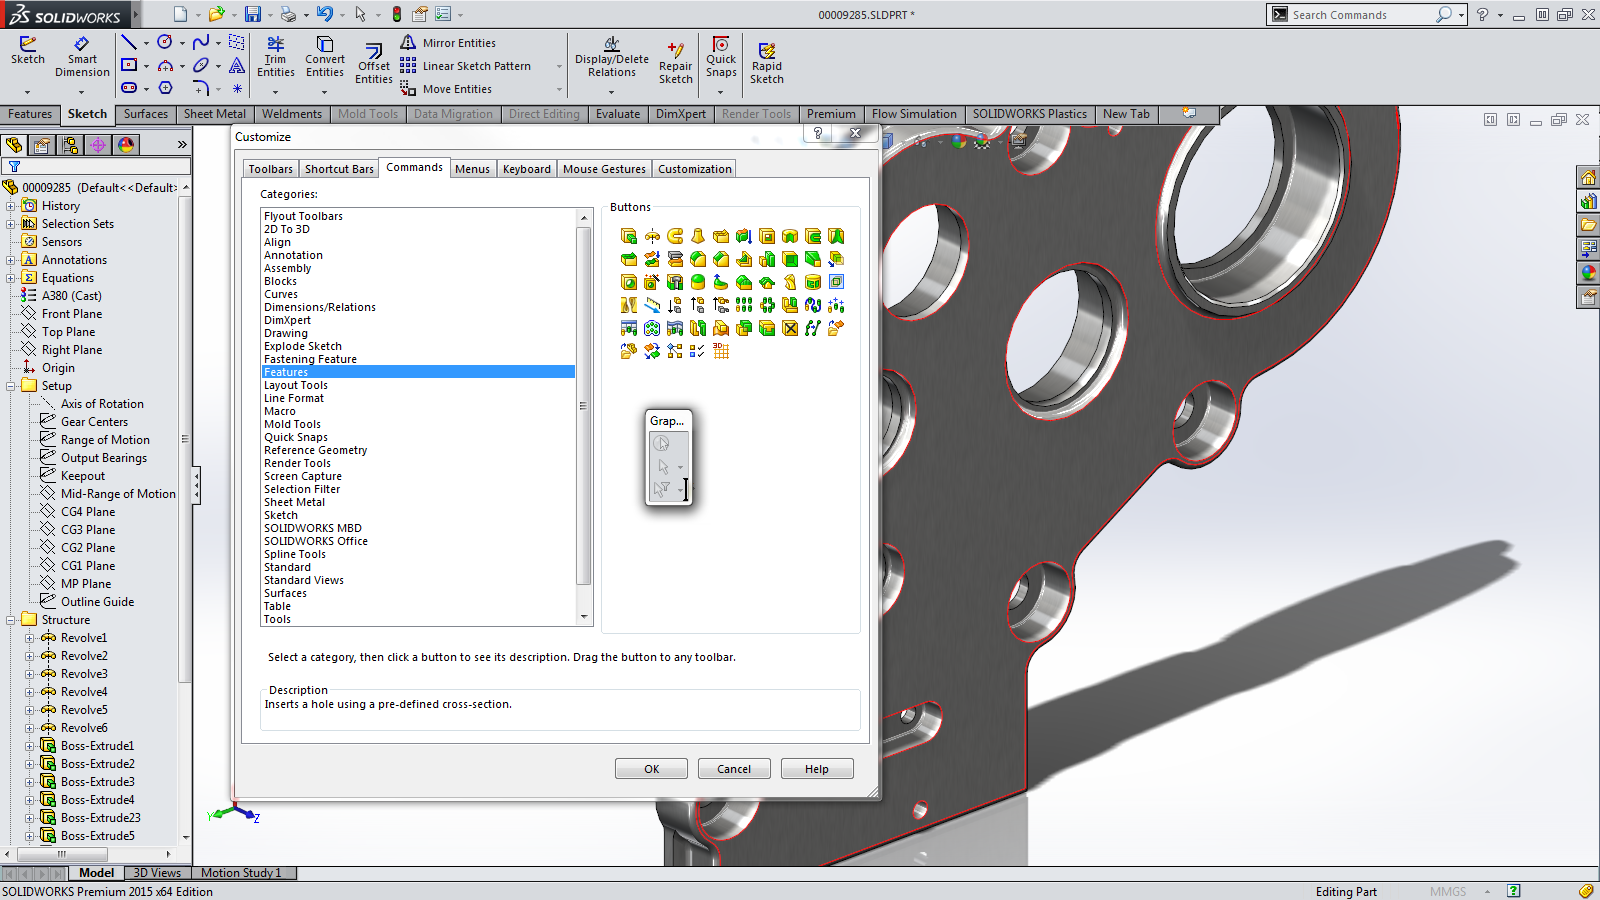 solidworks 2011 free download full version with crack 64 bit